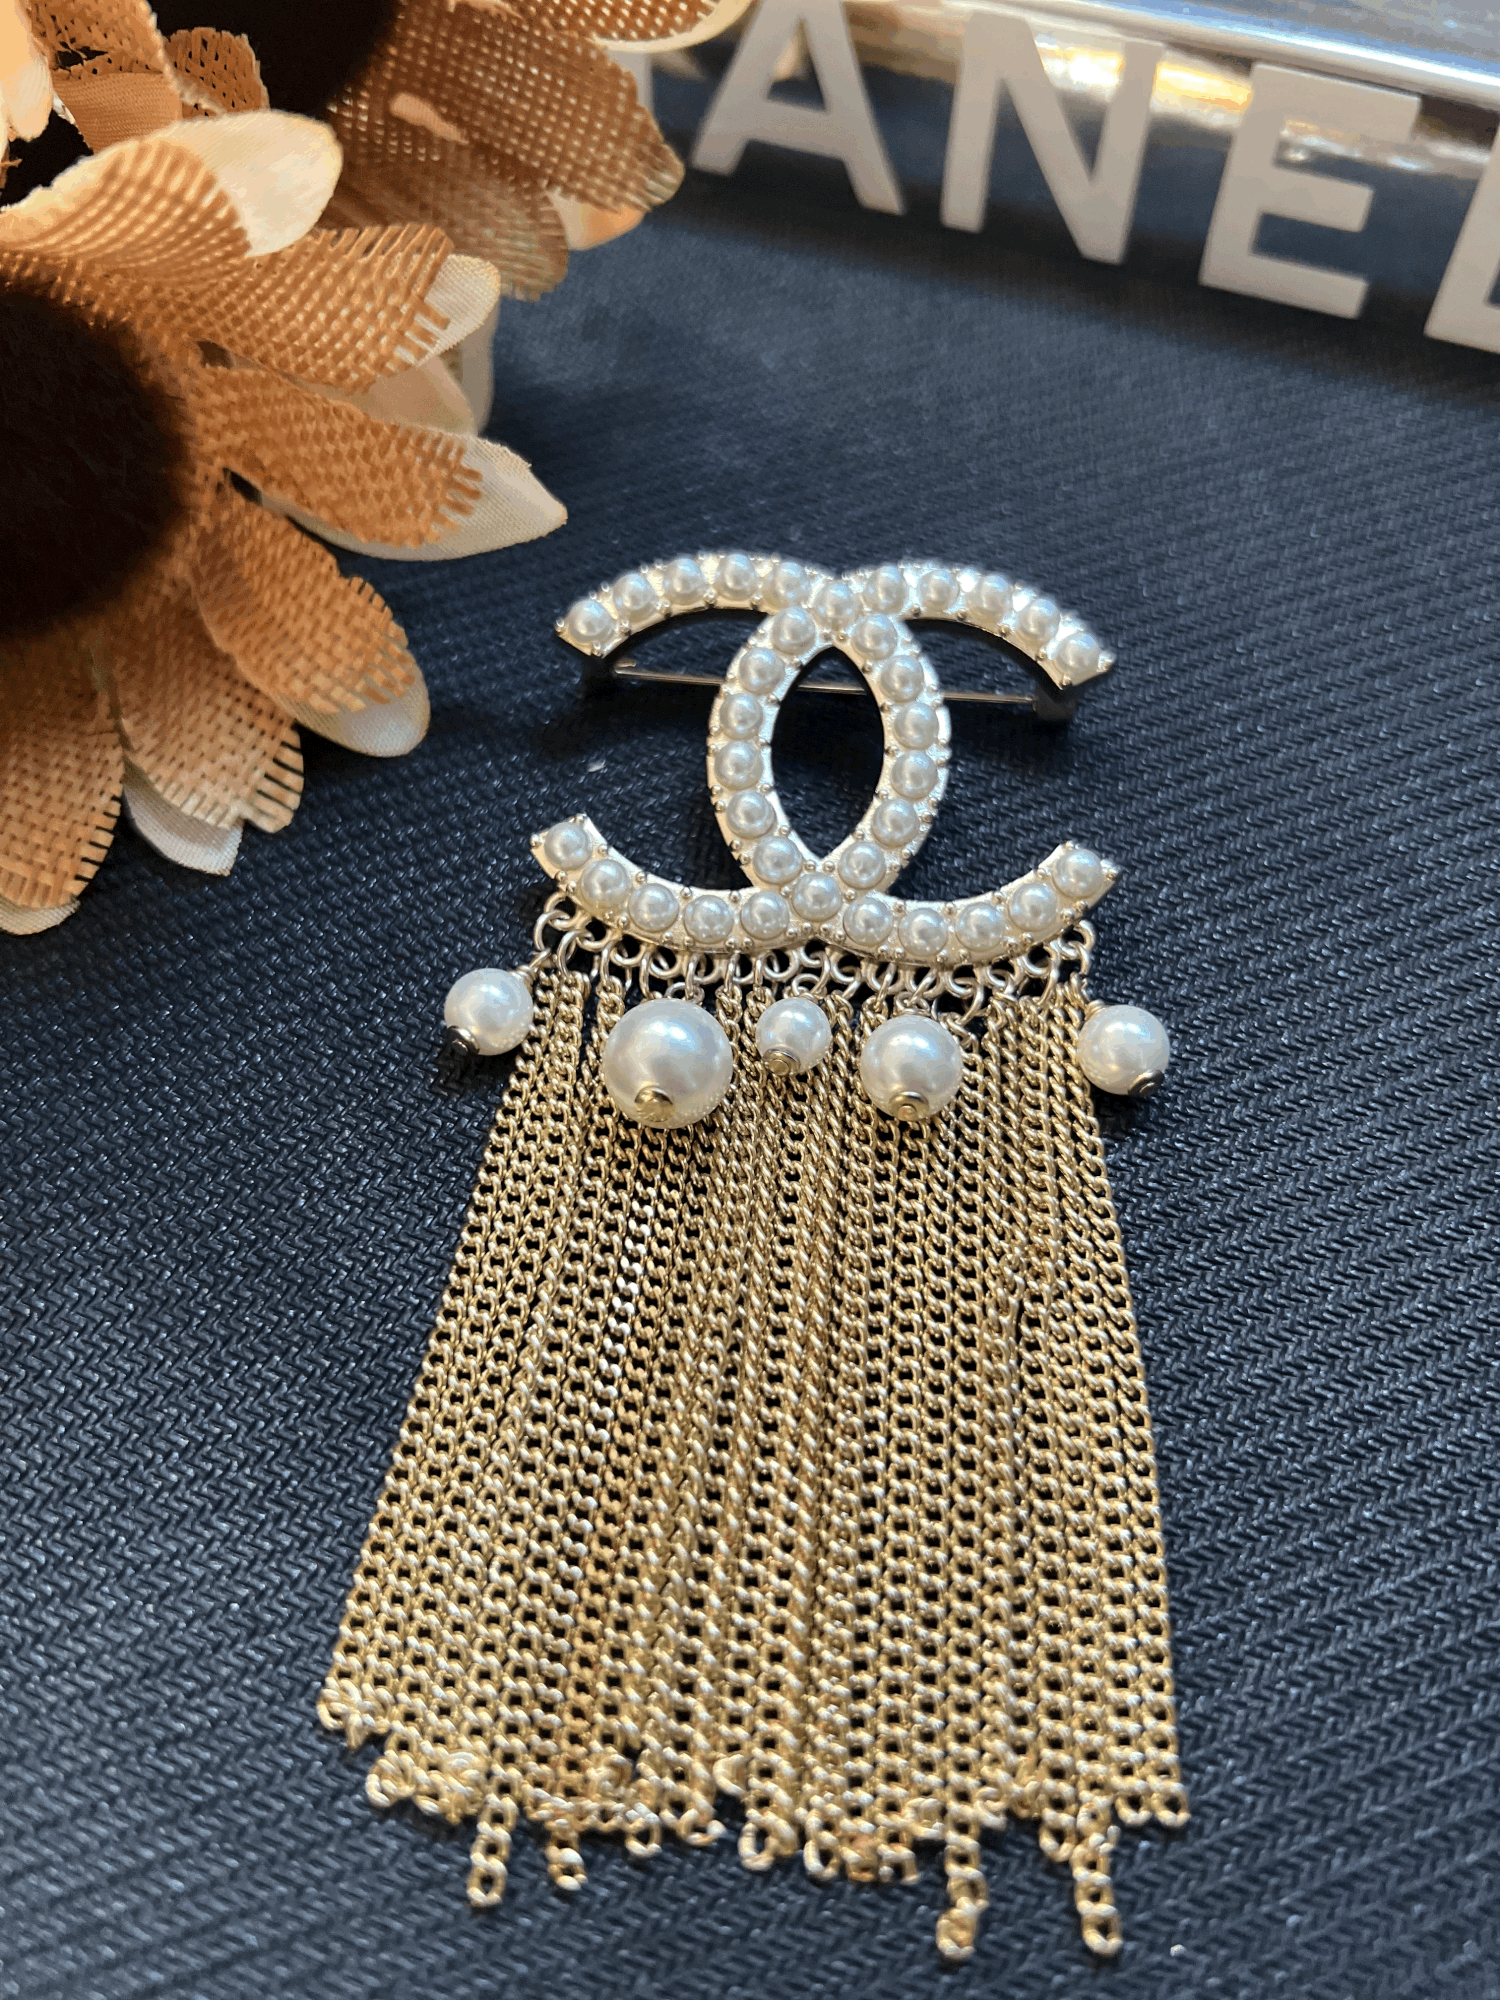 gold chanel brooch authentic